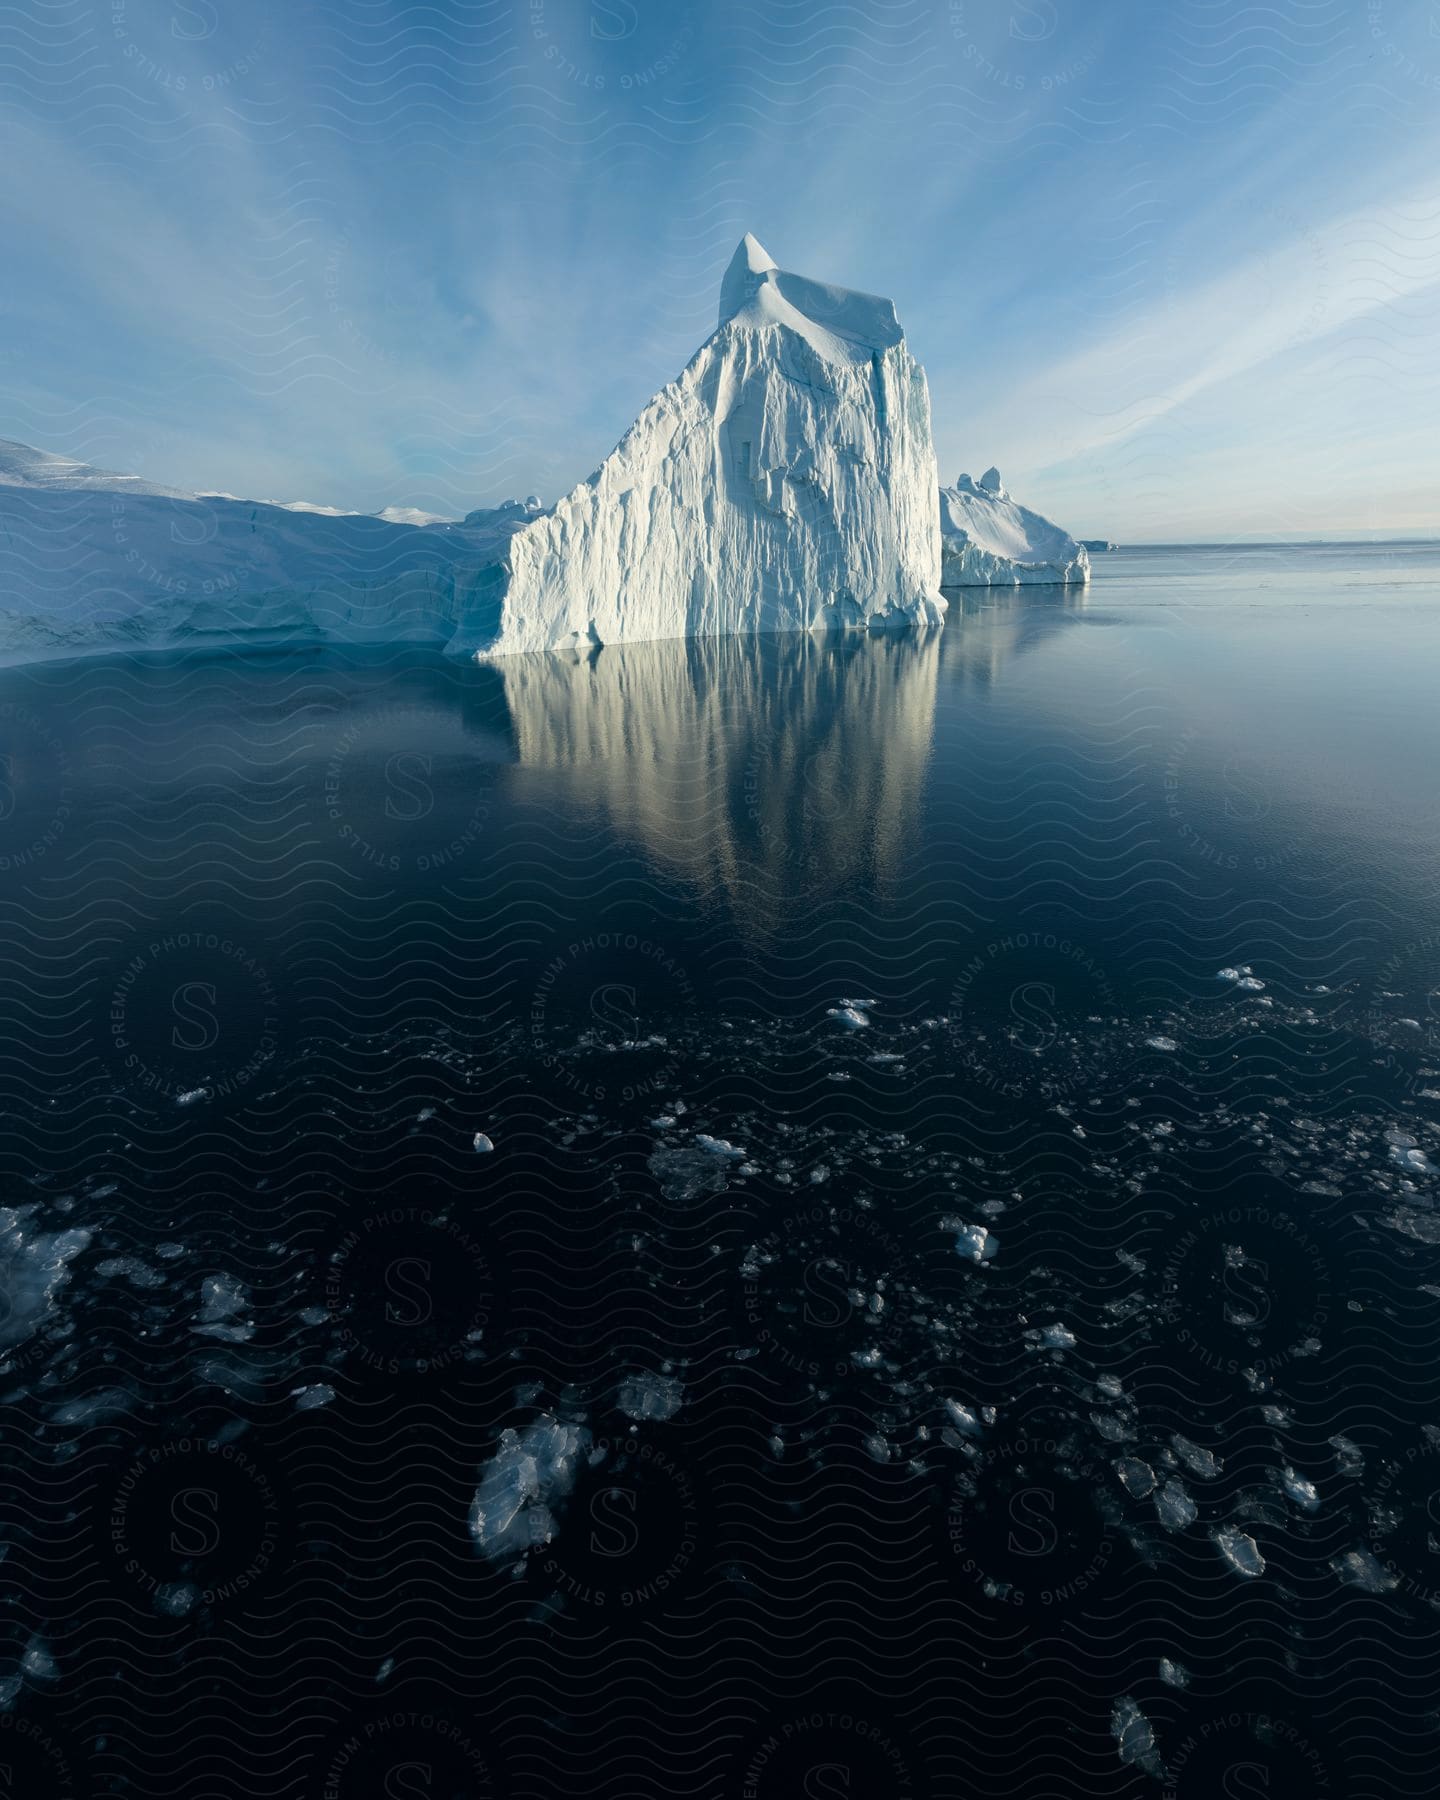 A large ice glacier on the coast of icy waters